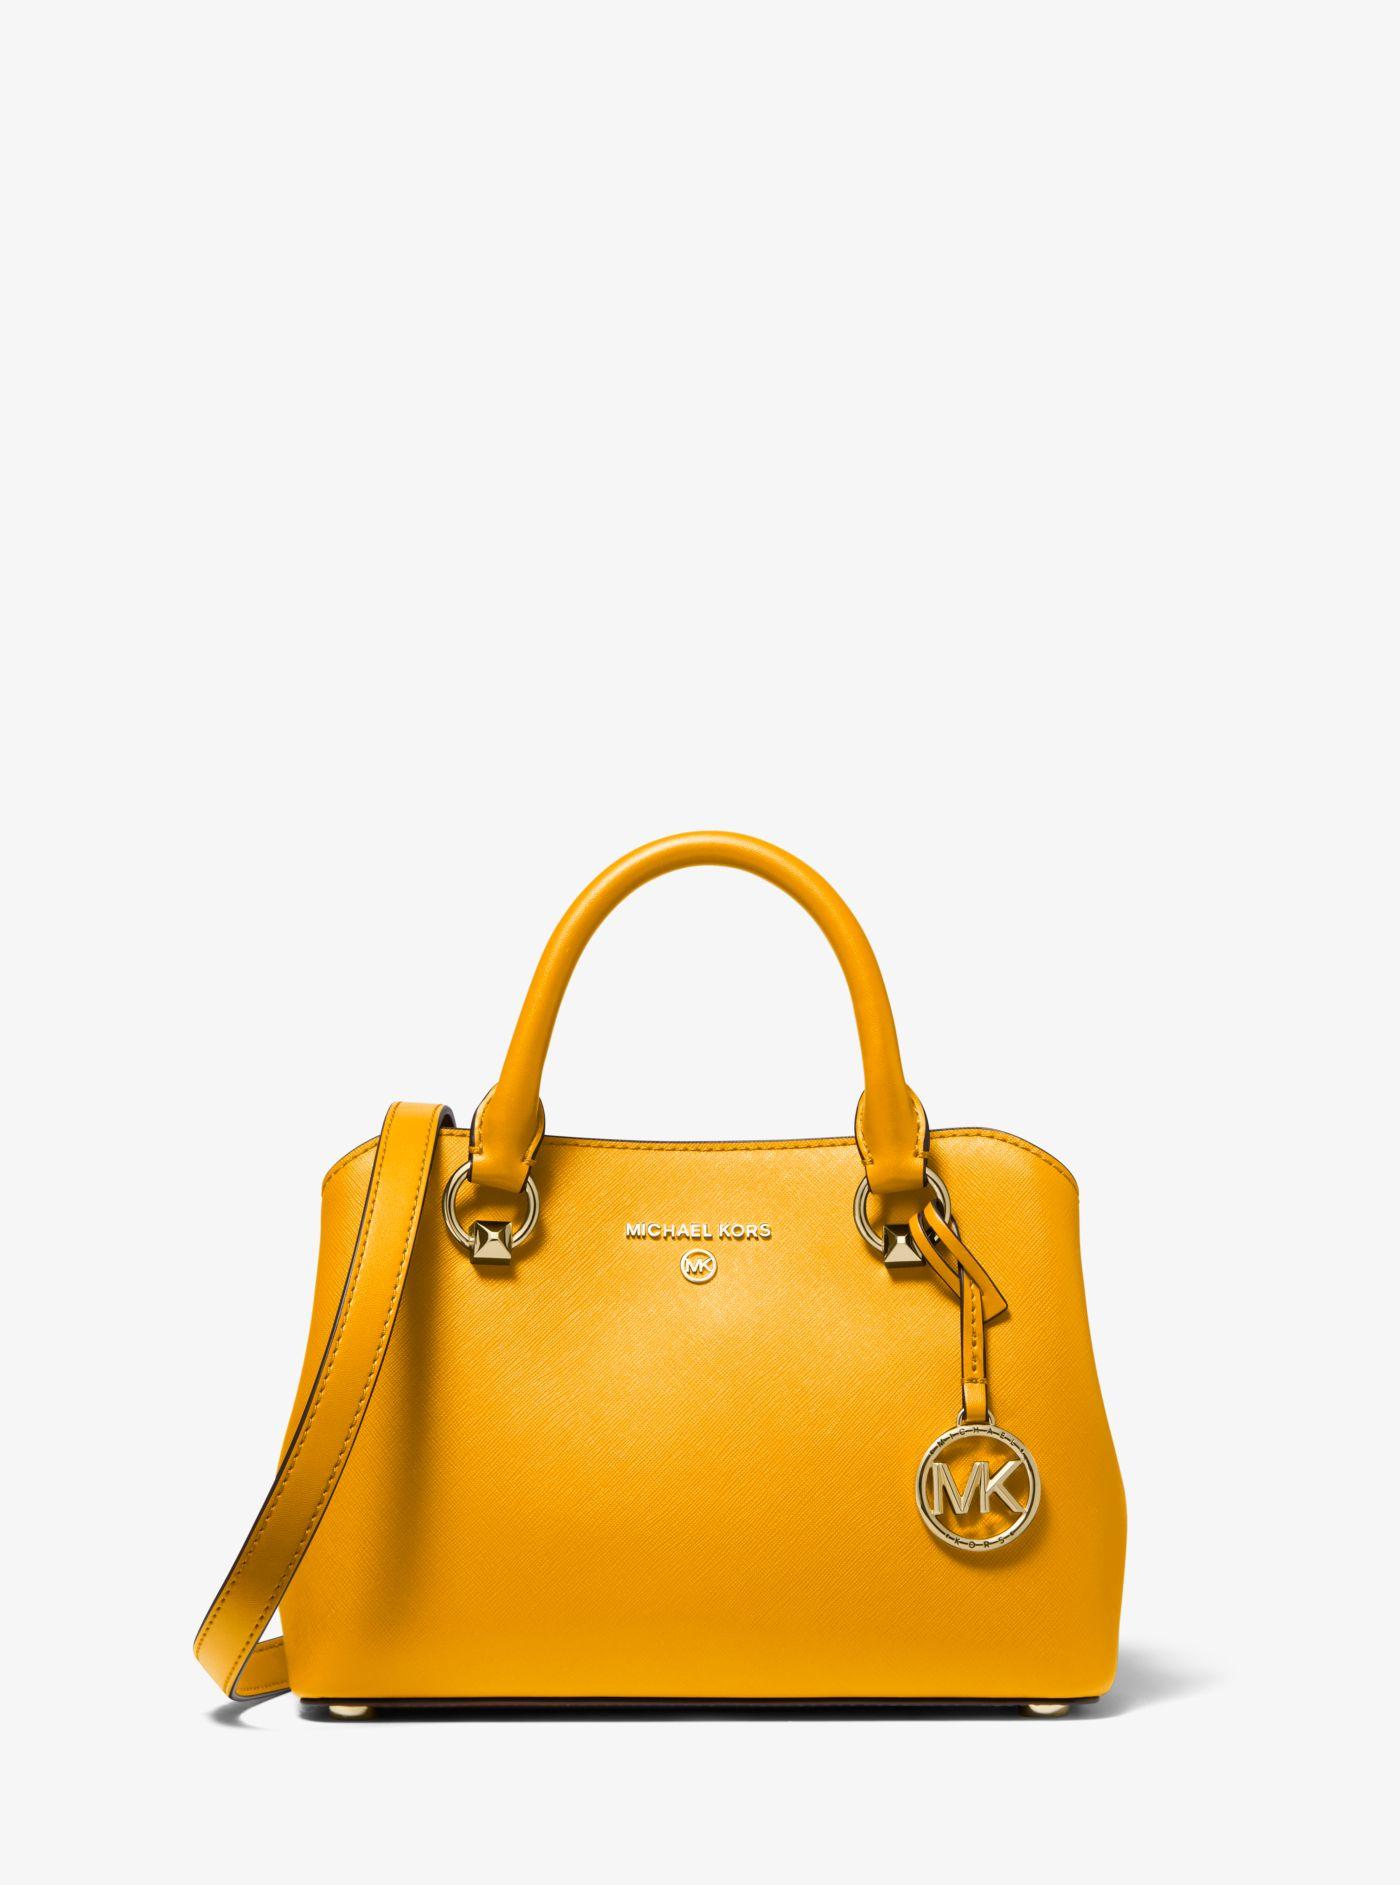 Michael Kors Edith Small Saffiano Leather Satchel in Yellow | Lyst